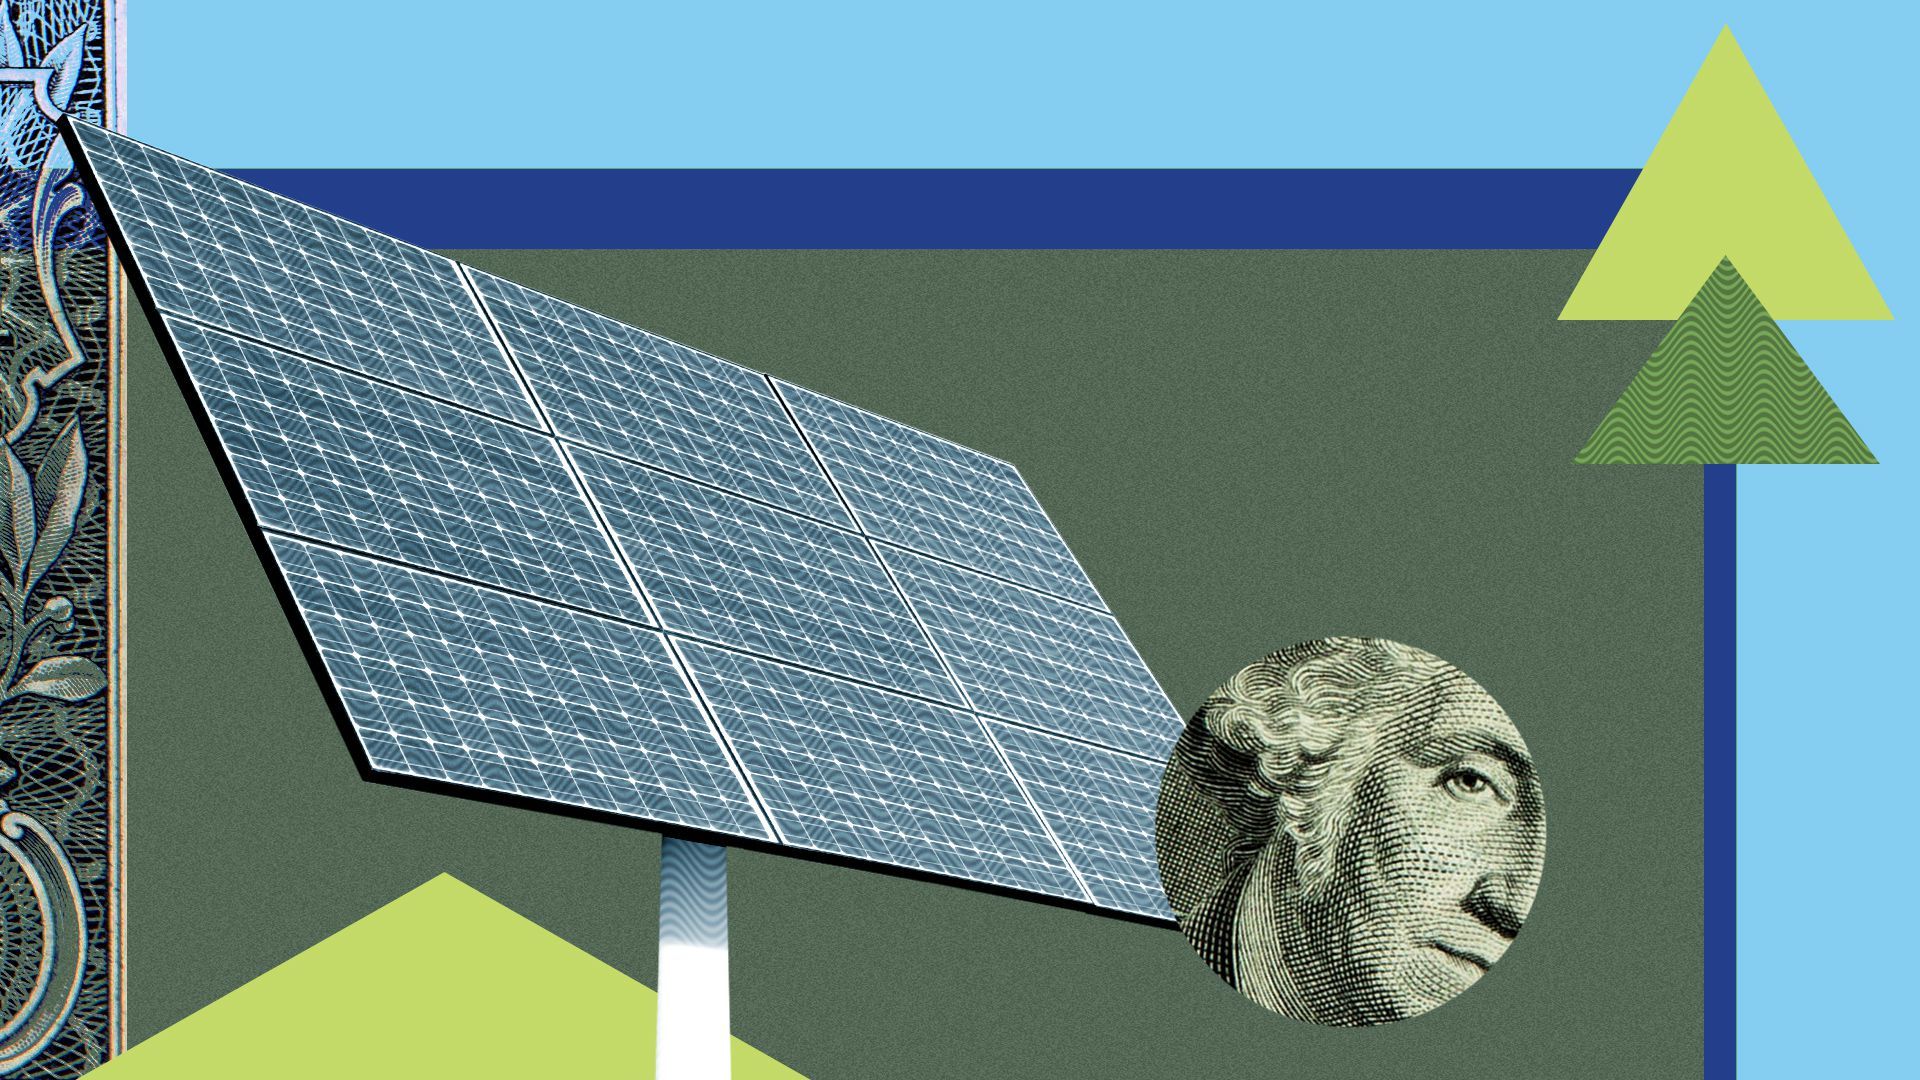 Illustration of a solar panel with shapes and zoomed in sections of dollar bills.